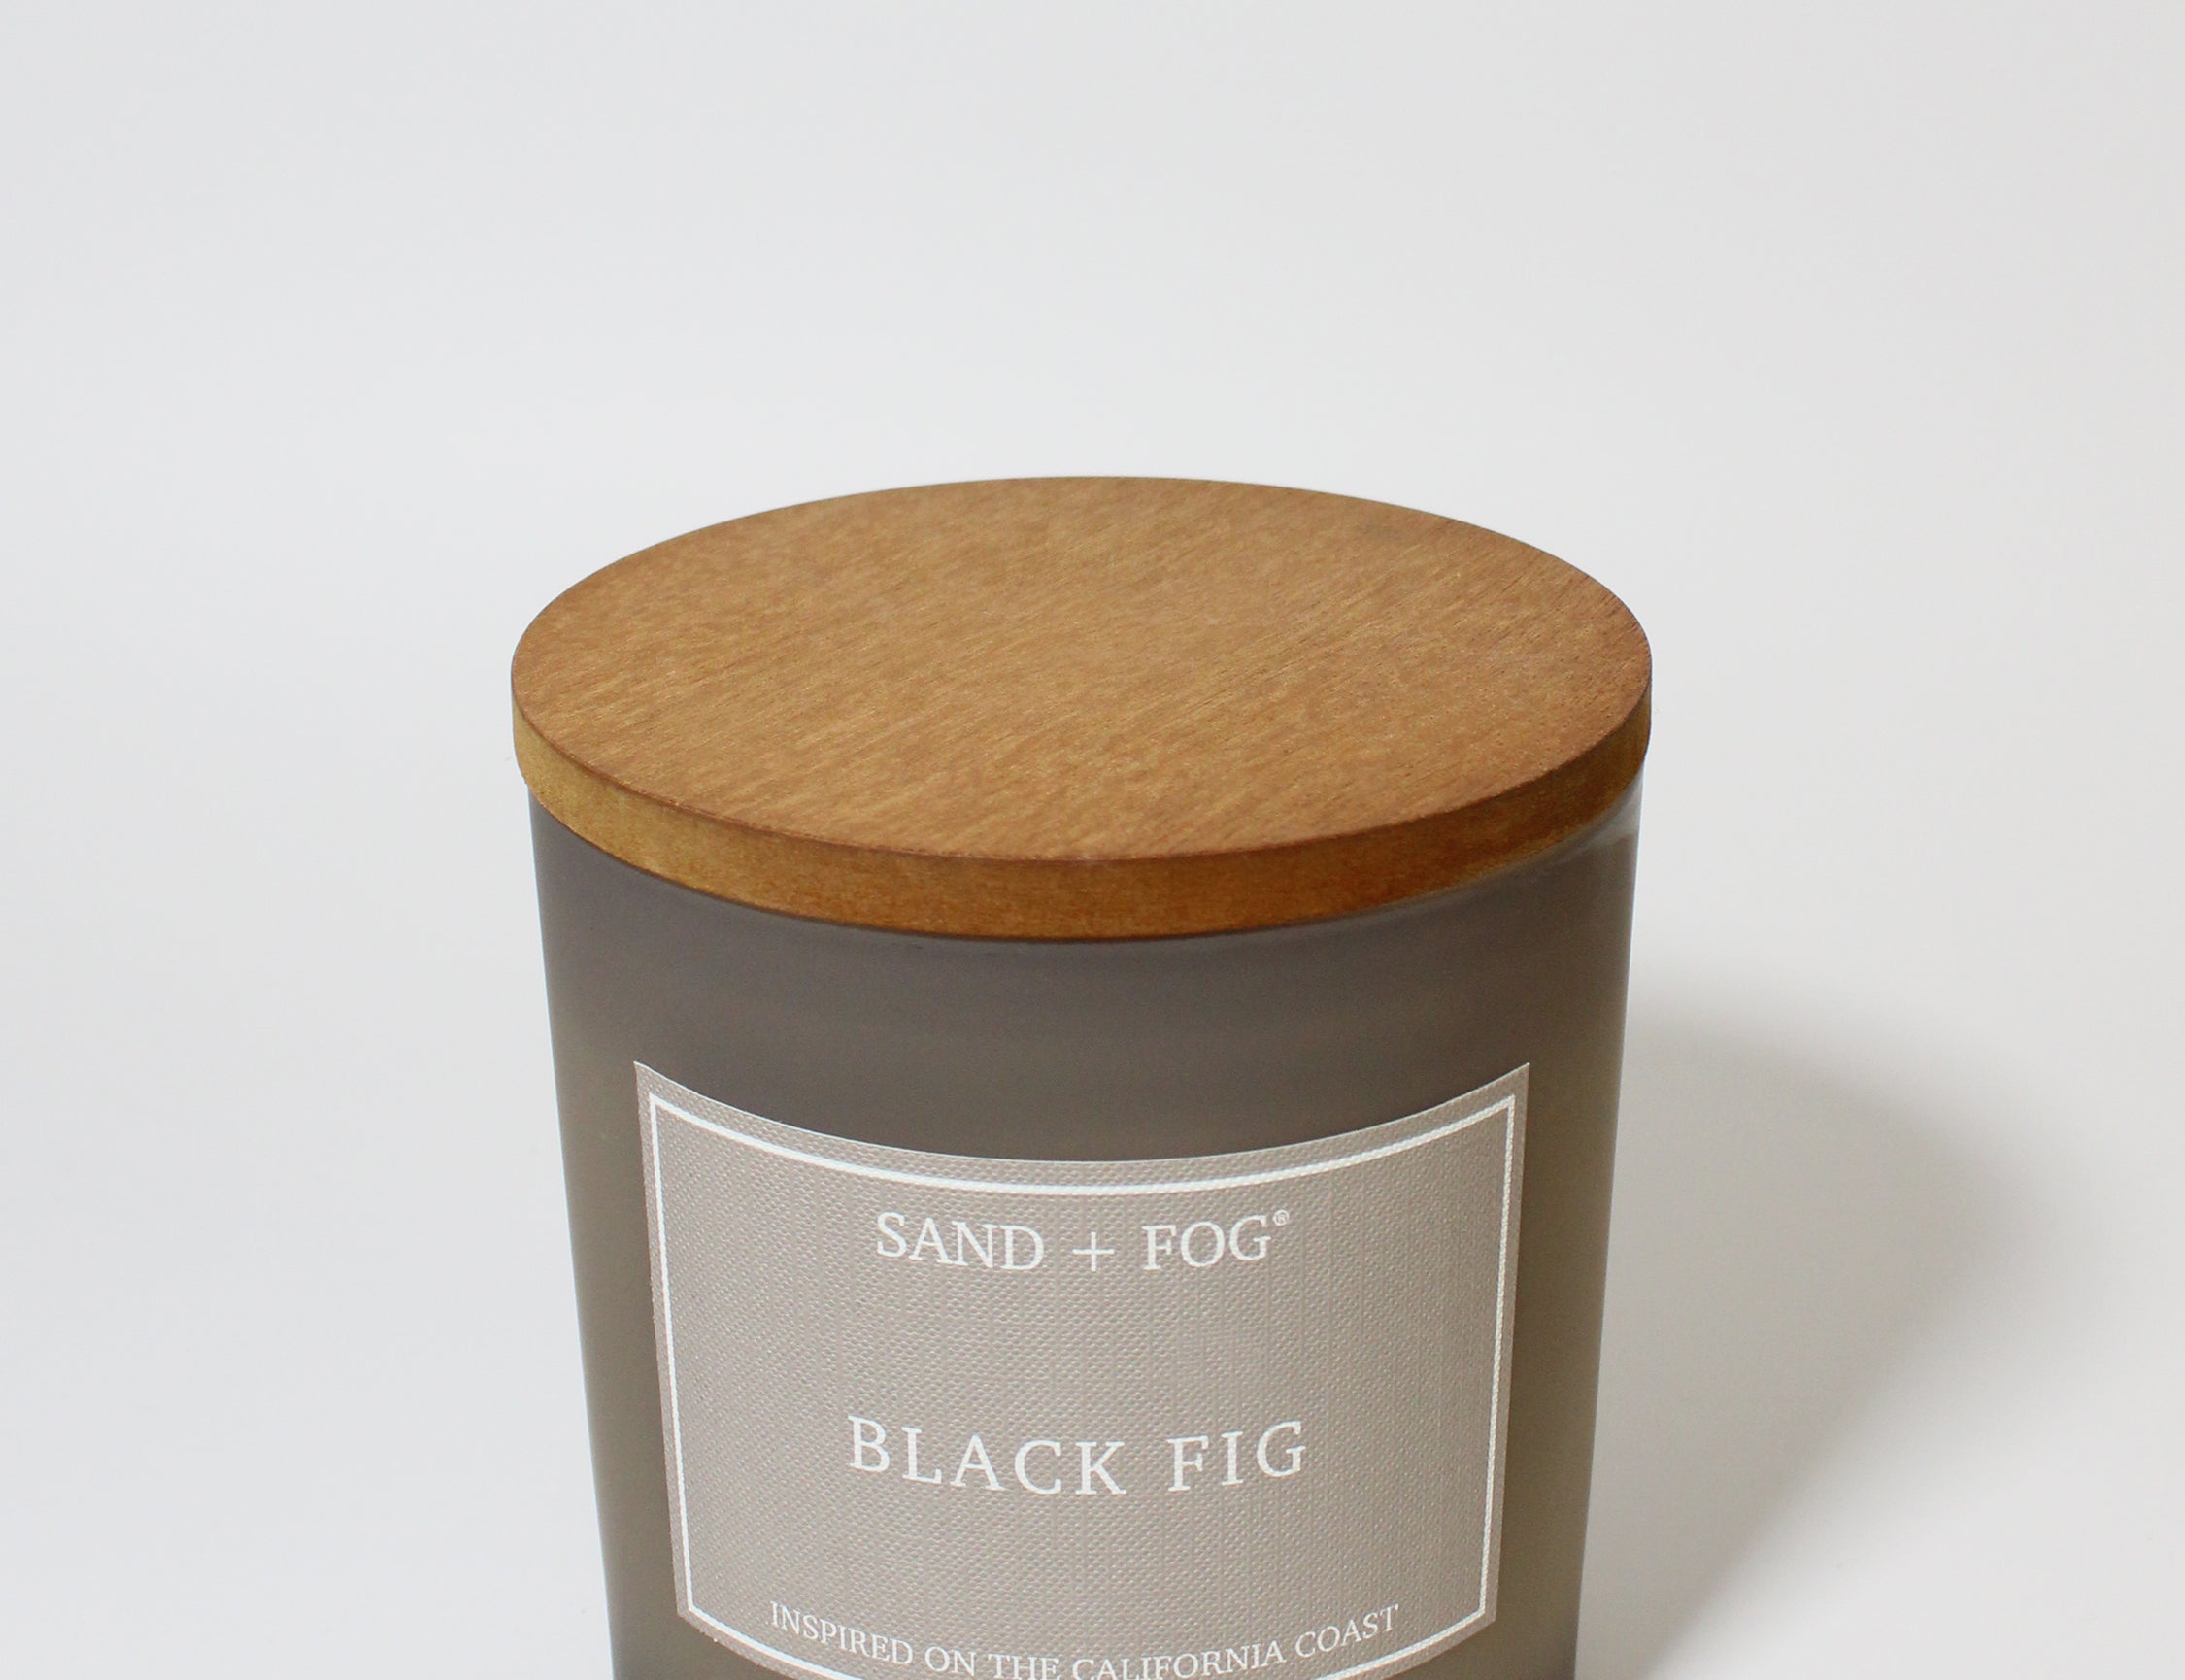 Black Fig 21 oz scented candle Gray vessel with solid wood lid